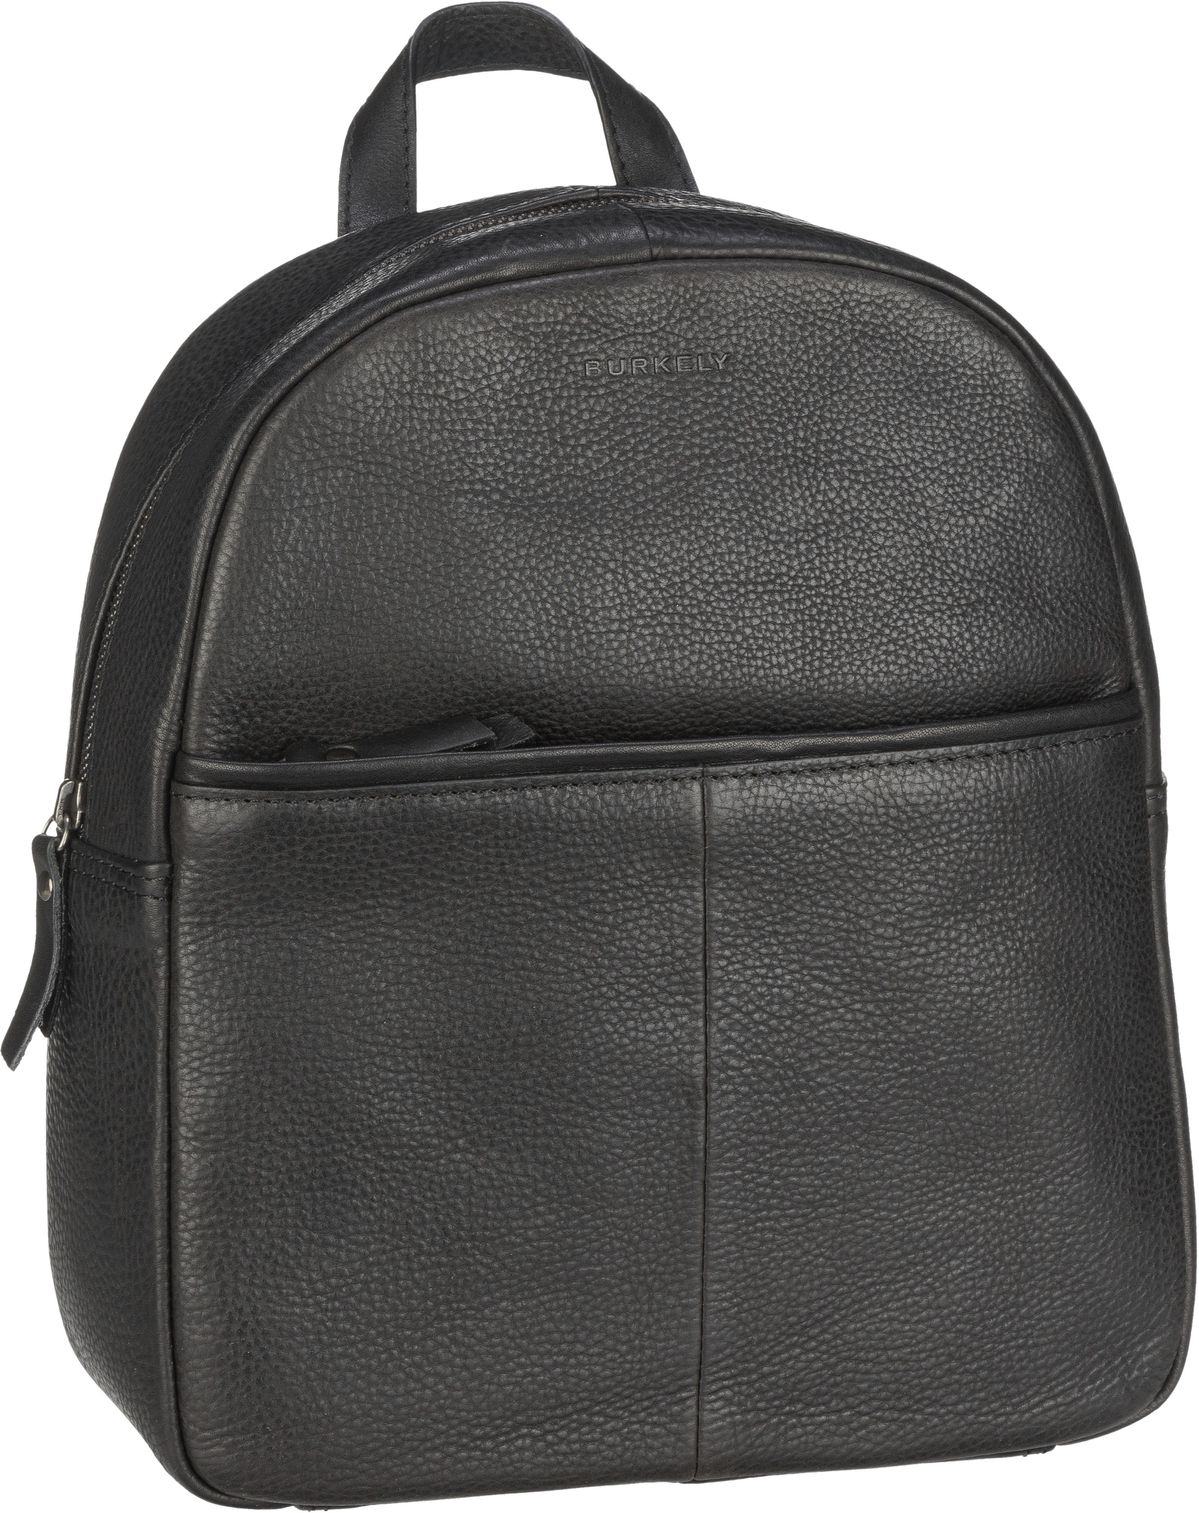 Burkely Antique Avery Backpack 5363 - Black